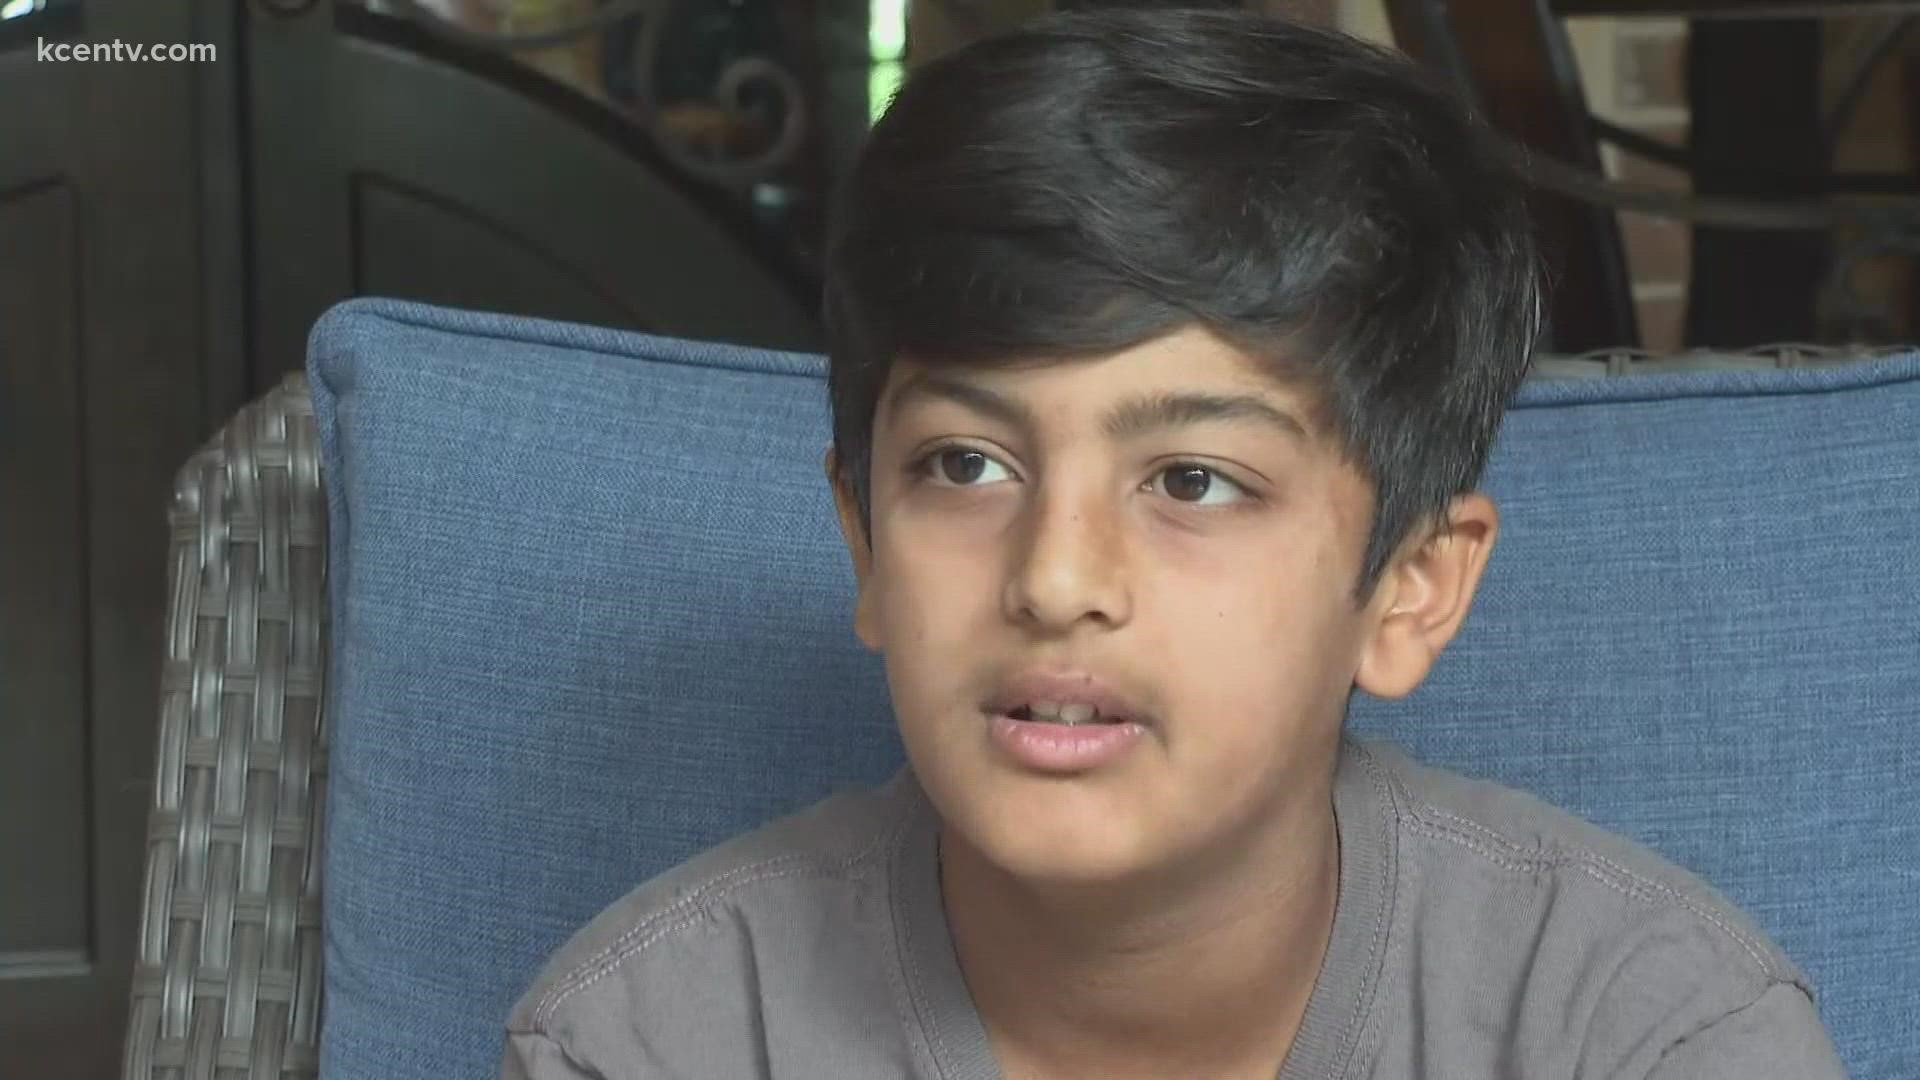 Midway Middle School student Vihann Sibal made it to the 2022 Scripps National Spelling Bee finals in Washington, D.C.